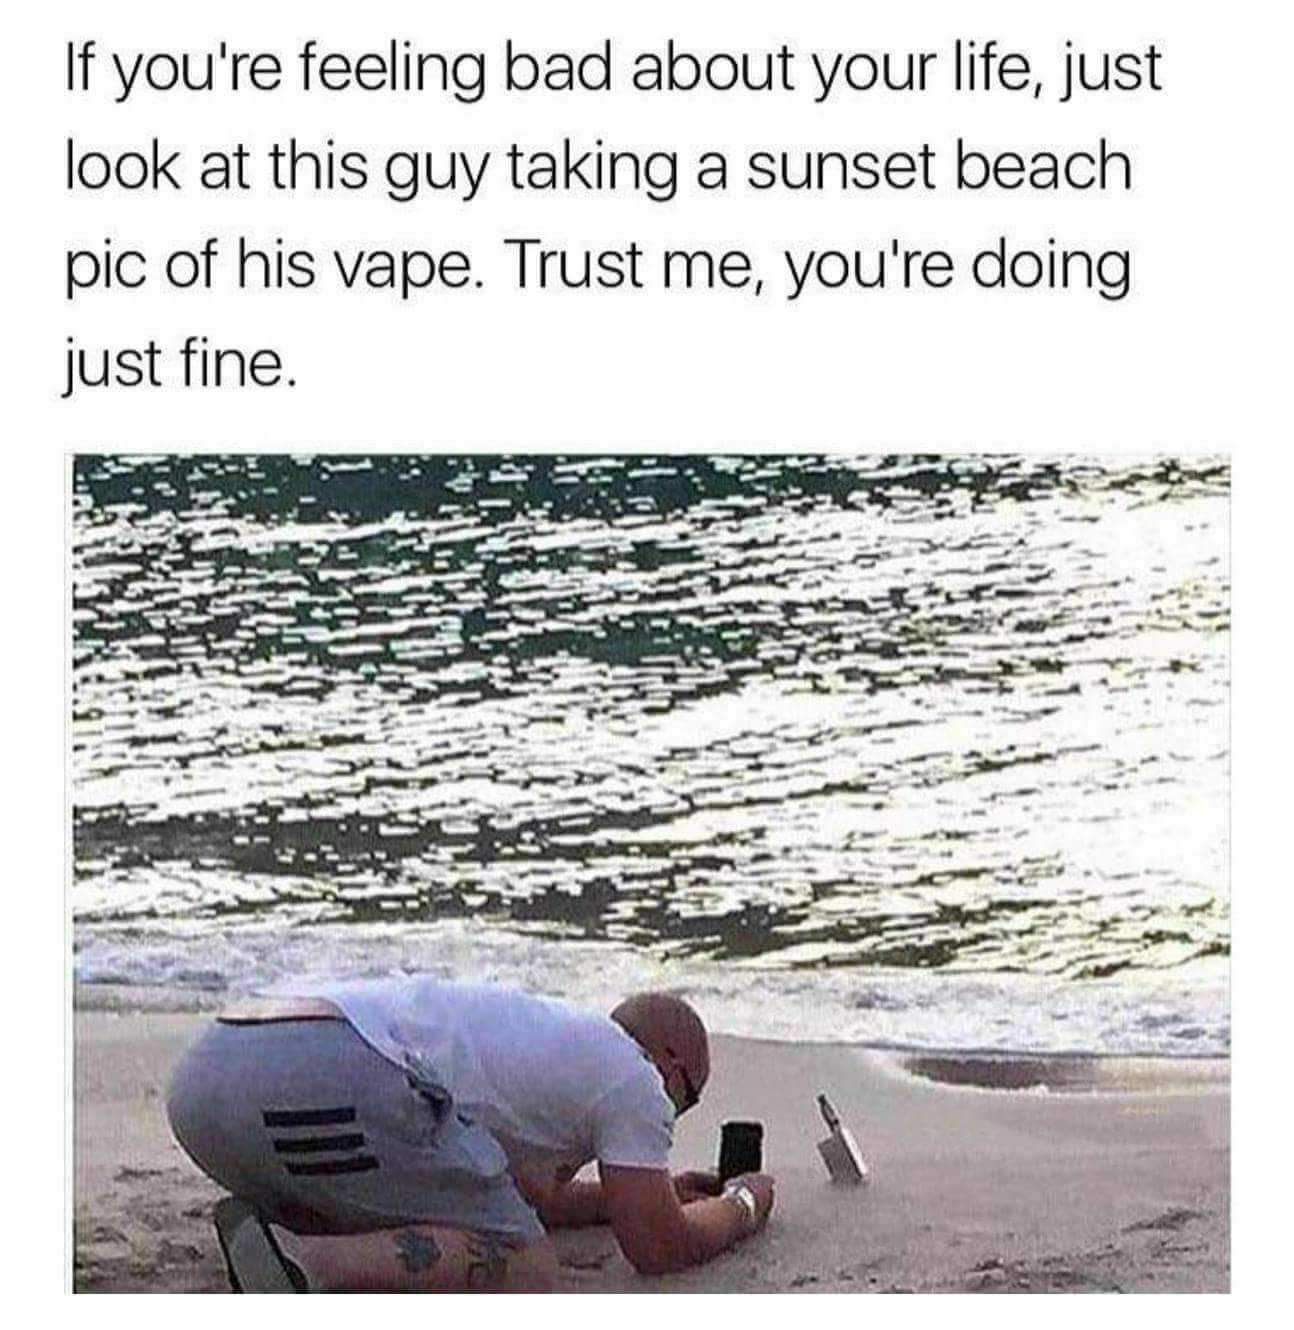 guy taking pic of vape on beach - If you're feeling bad about your life, just look at this guy taking a sunset beach pic of his vape. Trust me, you're doing just fine.